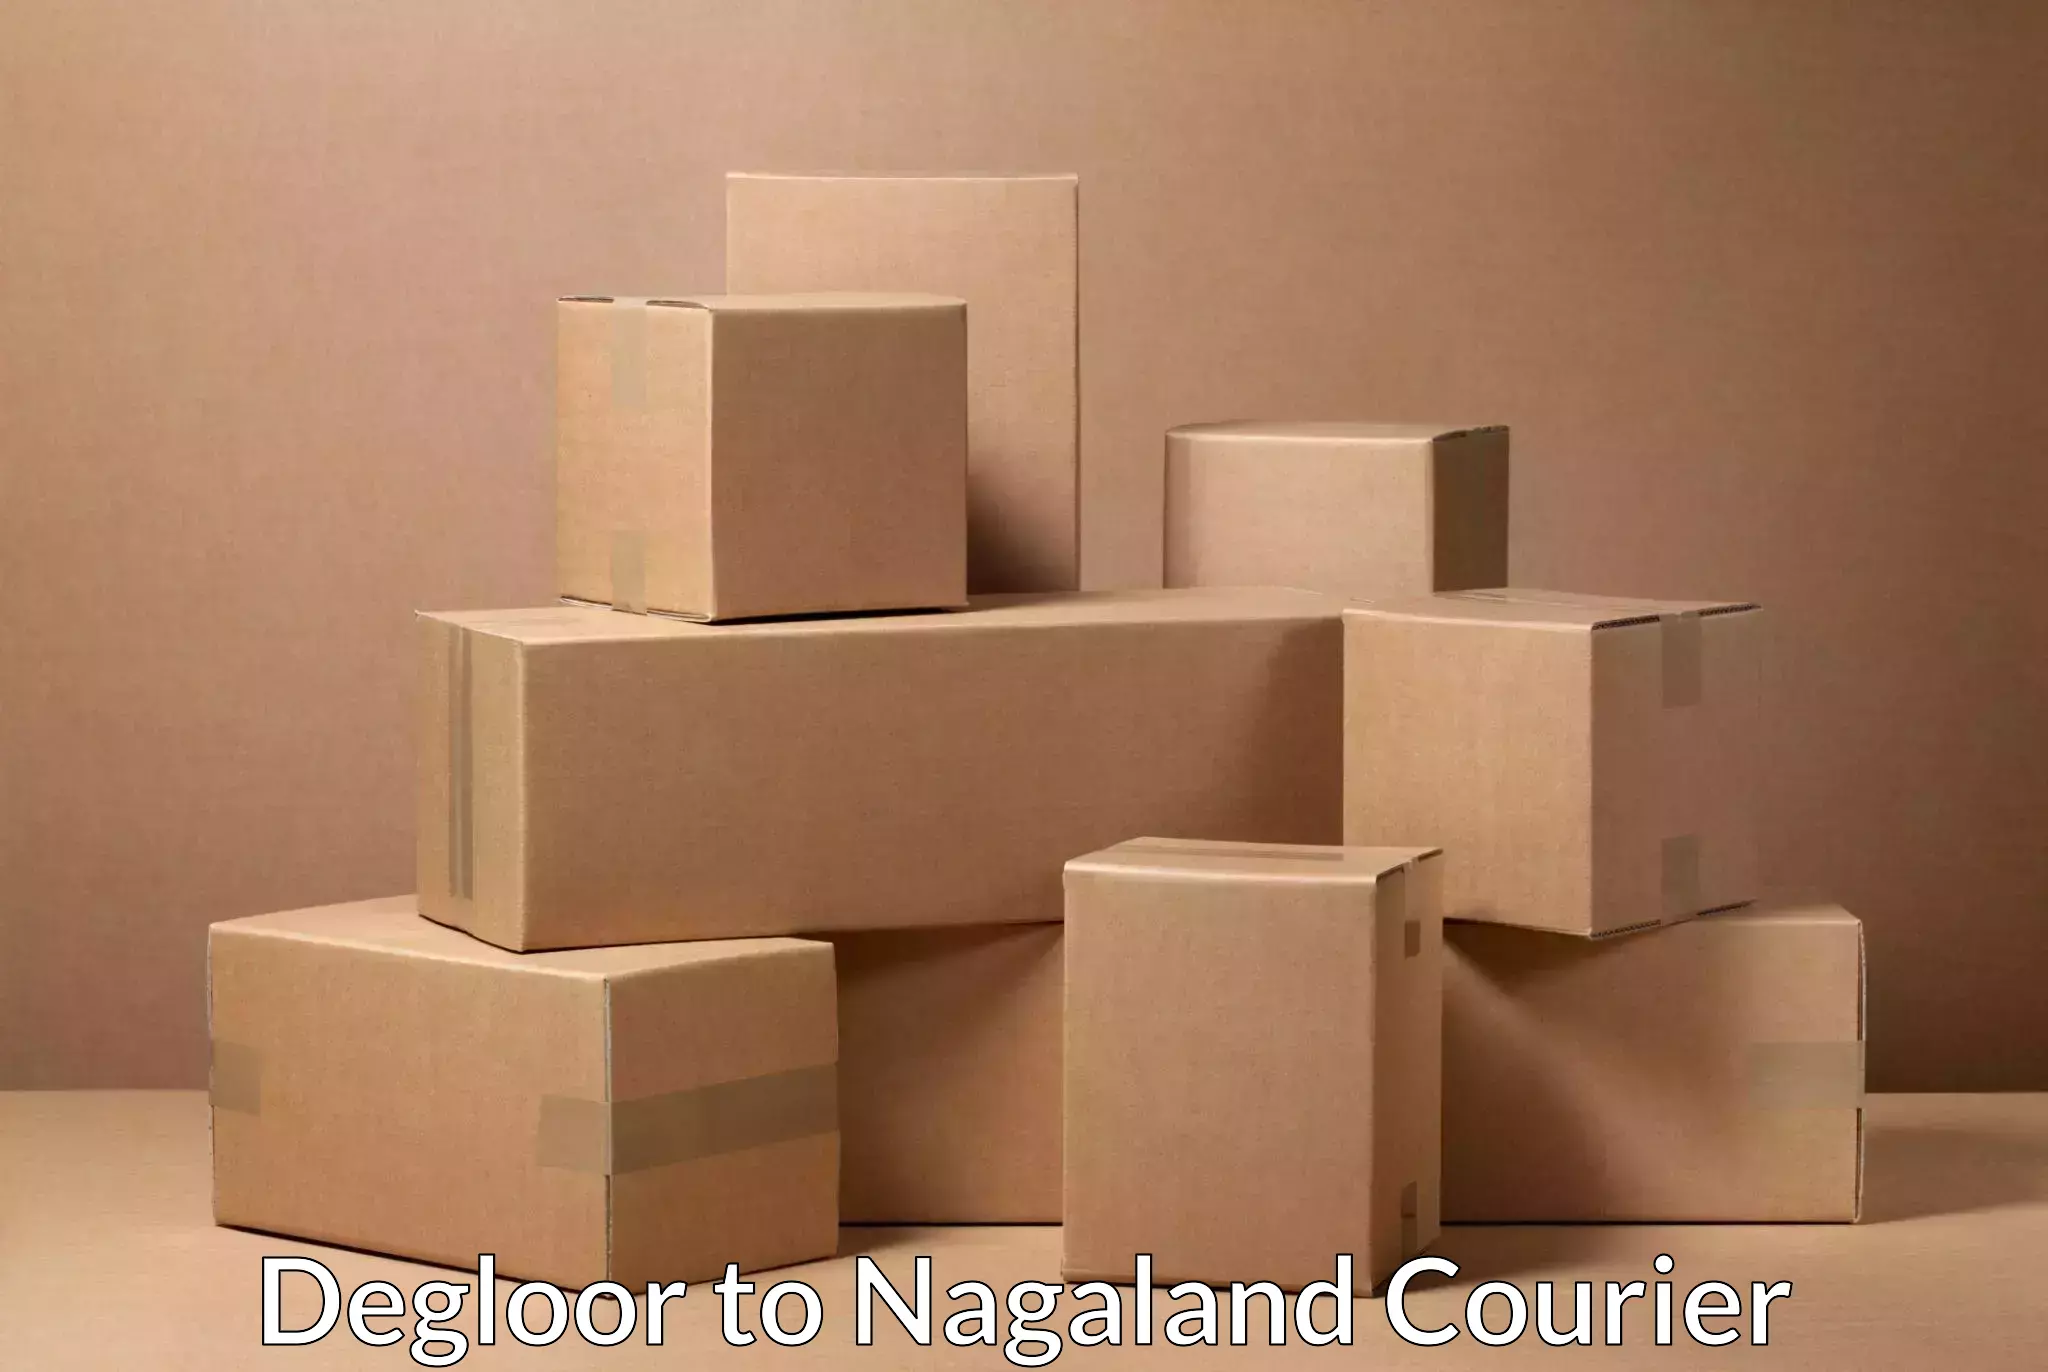 On-call courier service Degloor to Nagaland